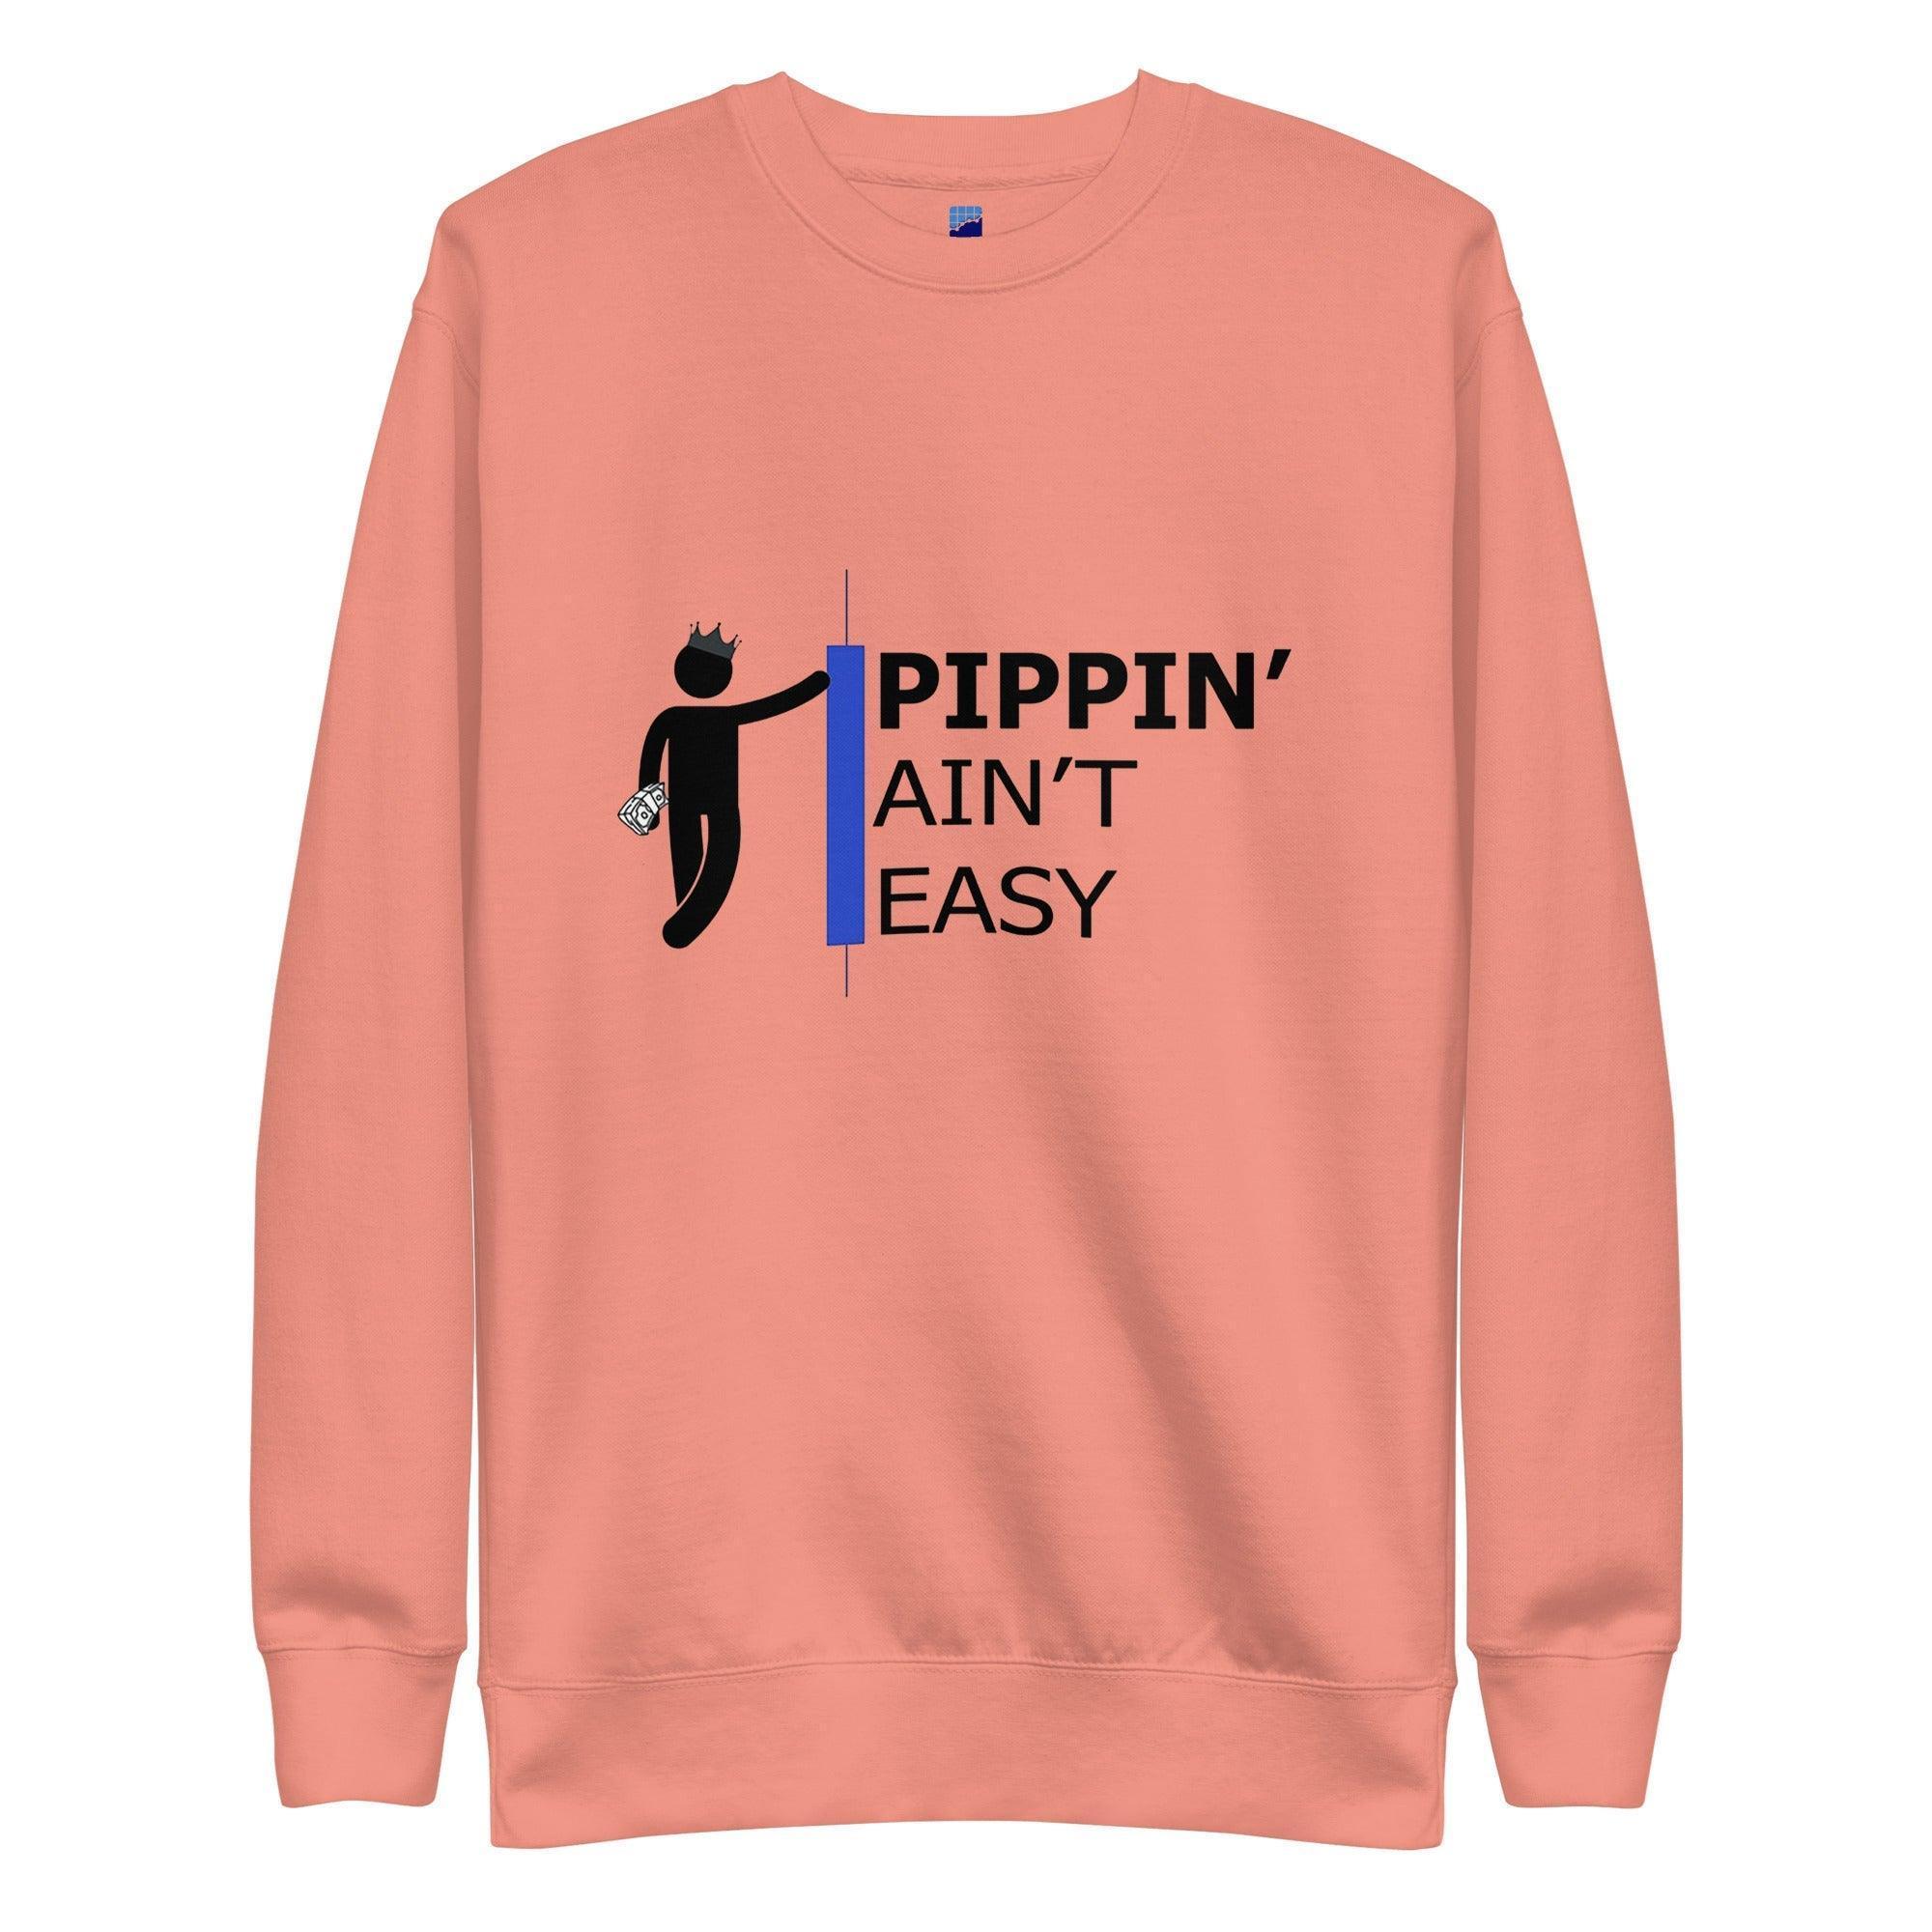 Pippin Ain't Easy Sweatshirt - InvestmenTees